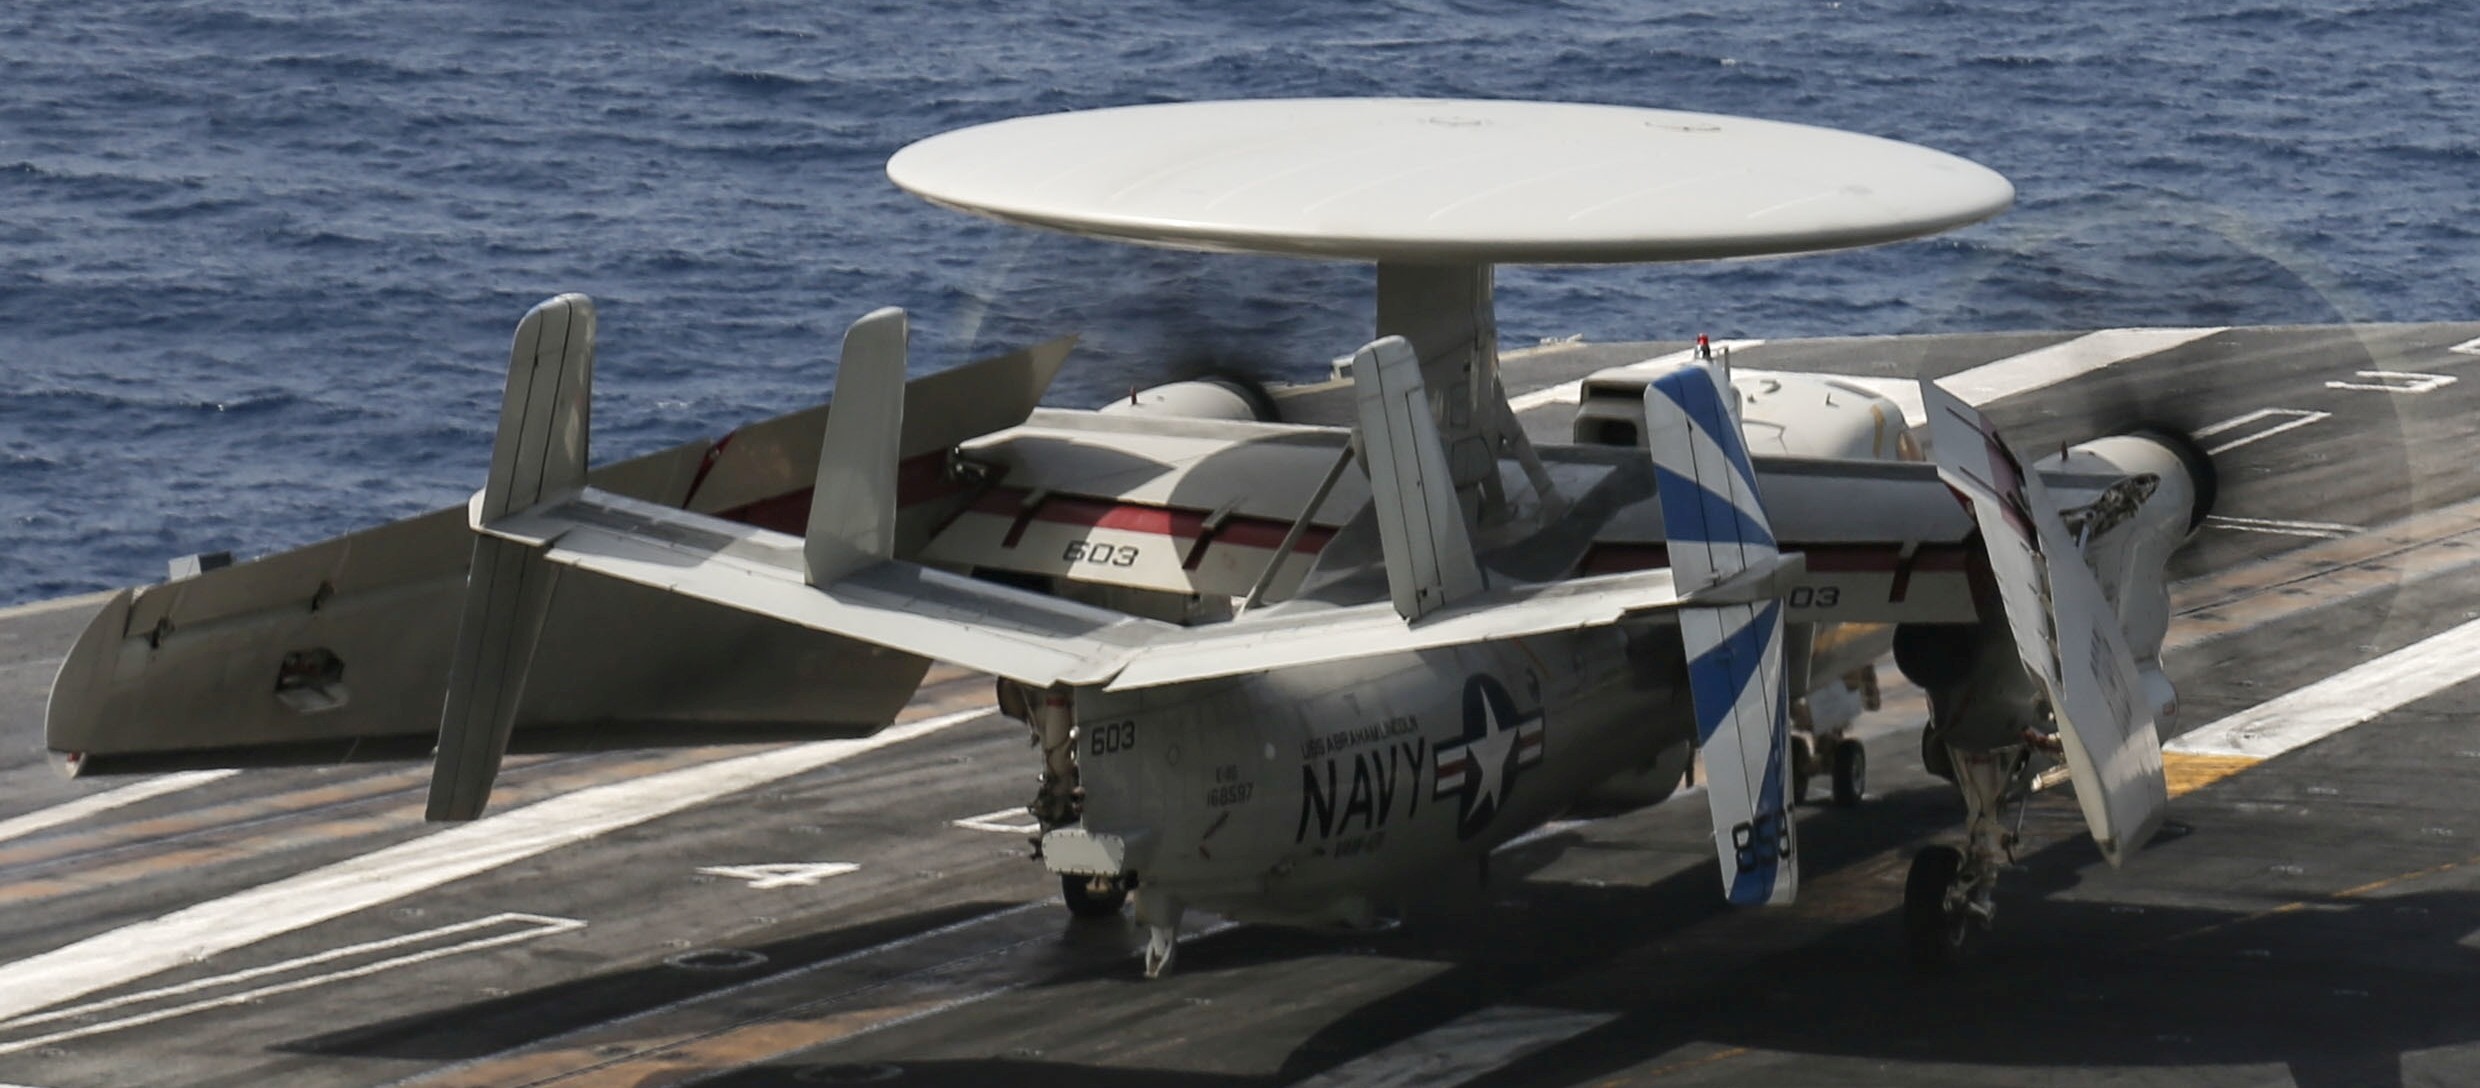 vaw-121 bluetails airborne command and control squadron us navy e-2d advanced hawkeye cvw-7 uss abraham lincoln cvn-72 71